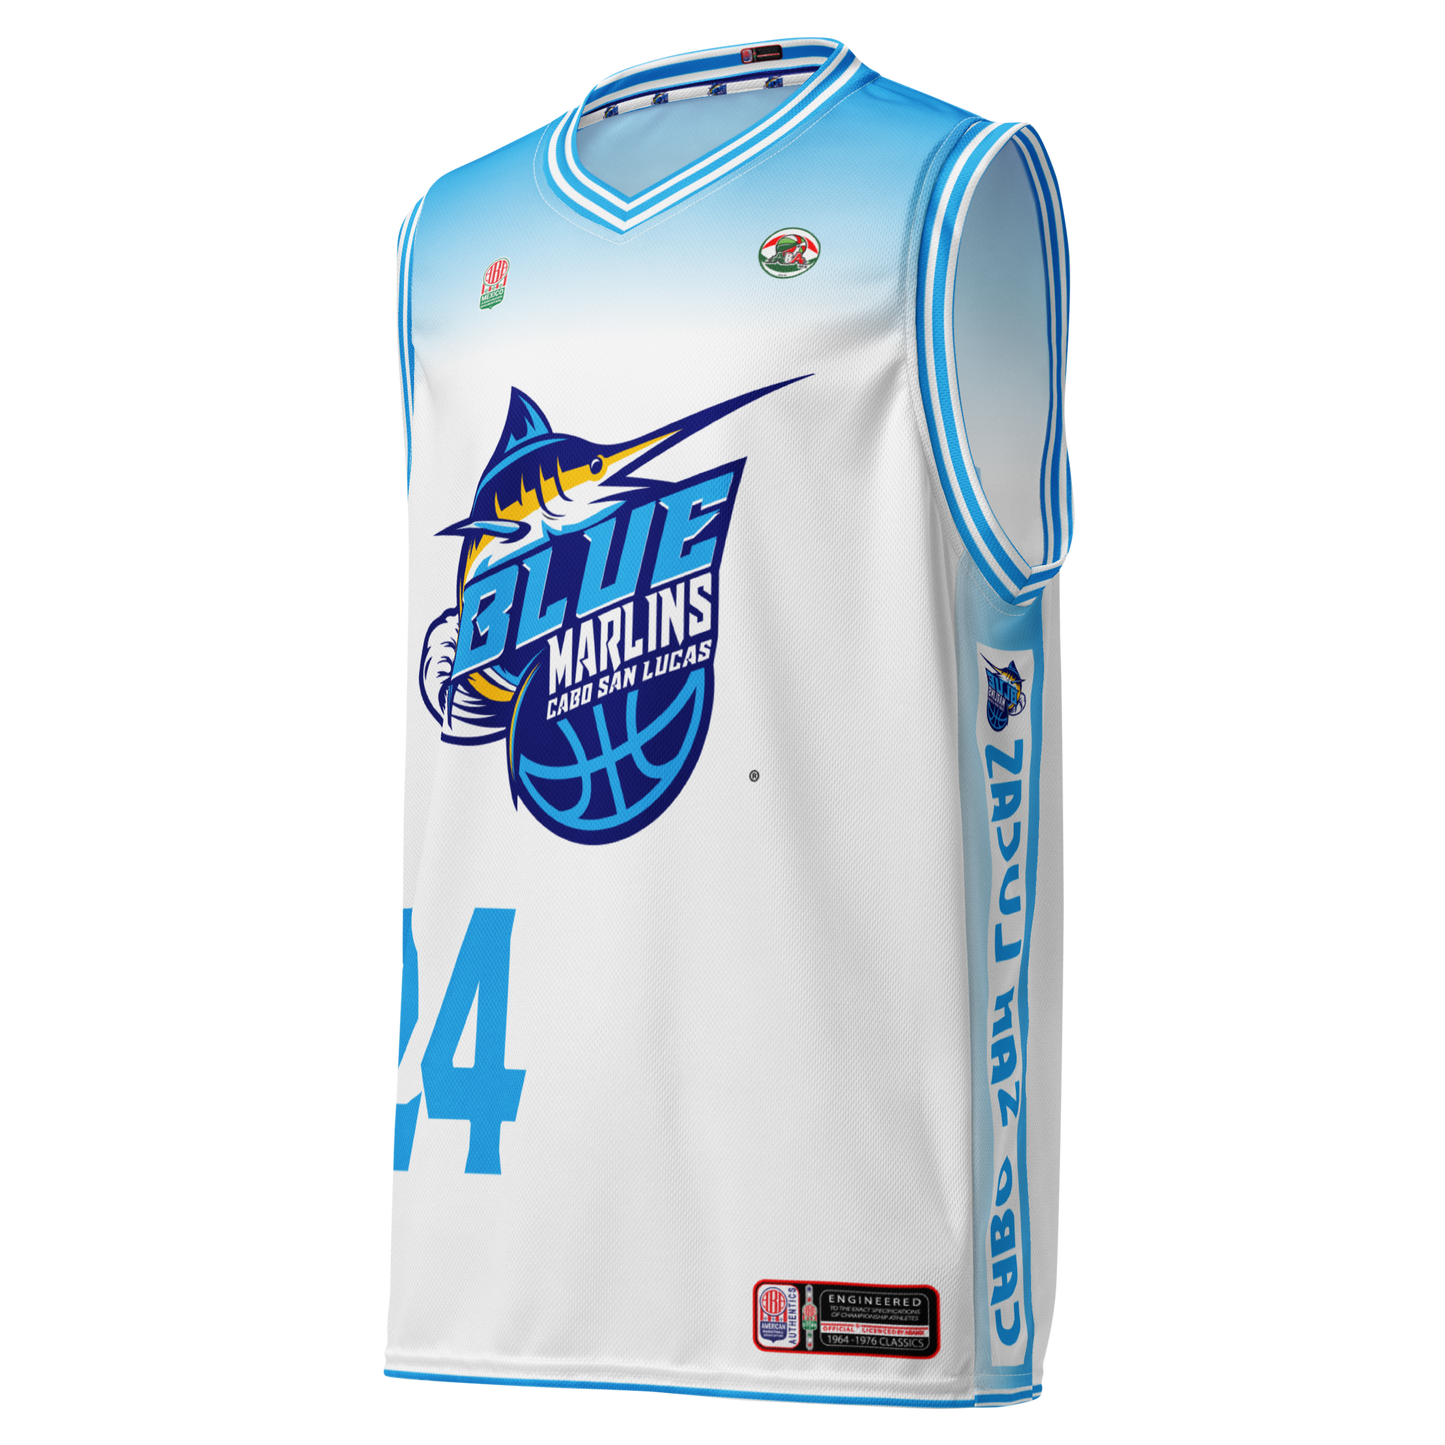 #24 COLBY HOME JERSEY